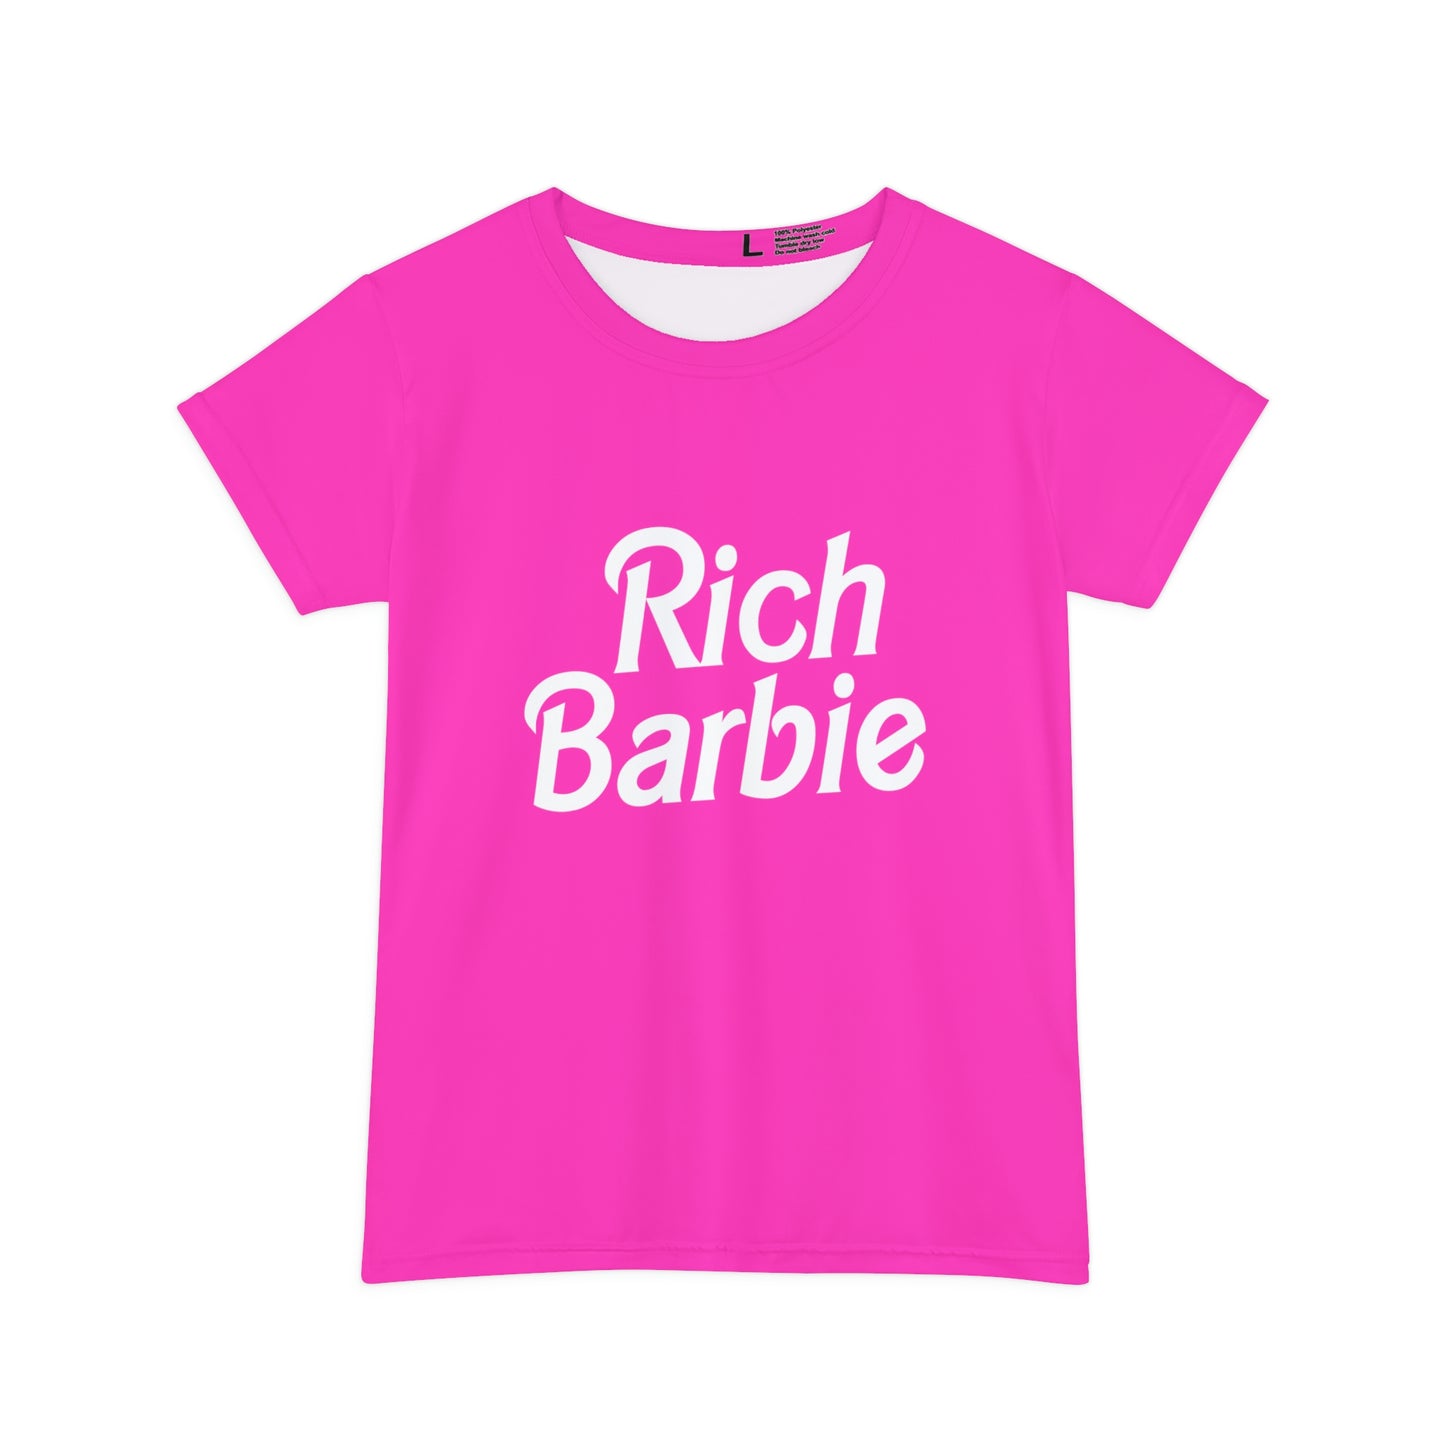 Rich Barbie, Bachelorette Party Shirts, Bridesmaid Gifts, Here comes the Party Tees, Group Party Favor Shirts, Bridal Party Shirt for women